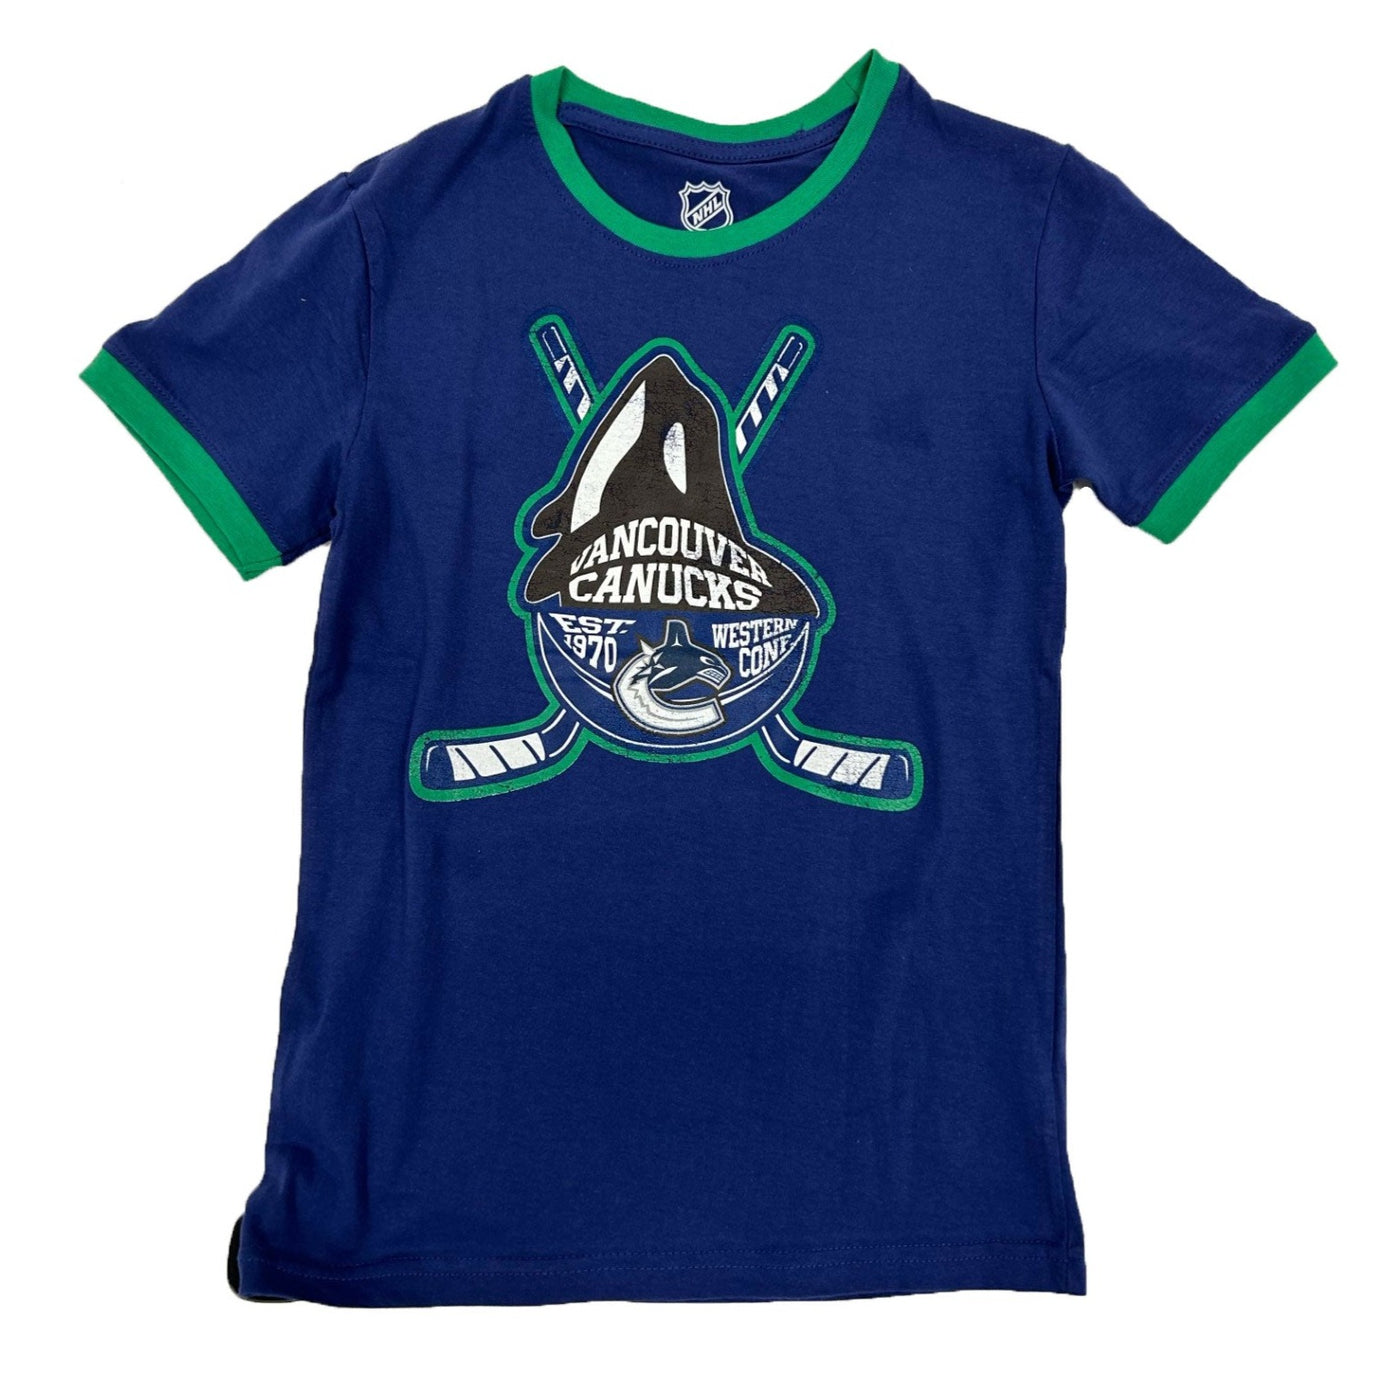 Outer Stuff Ice City Crew Youth Shirt - Vancouver Canucks - TheHockeyShop.com